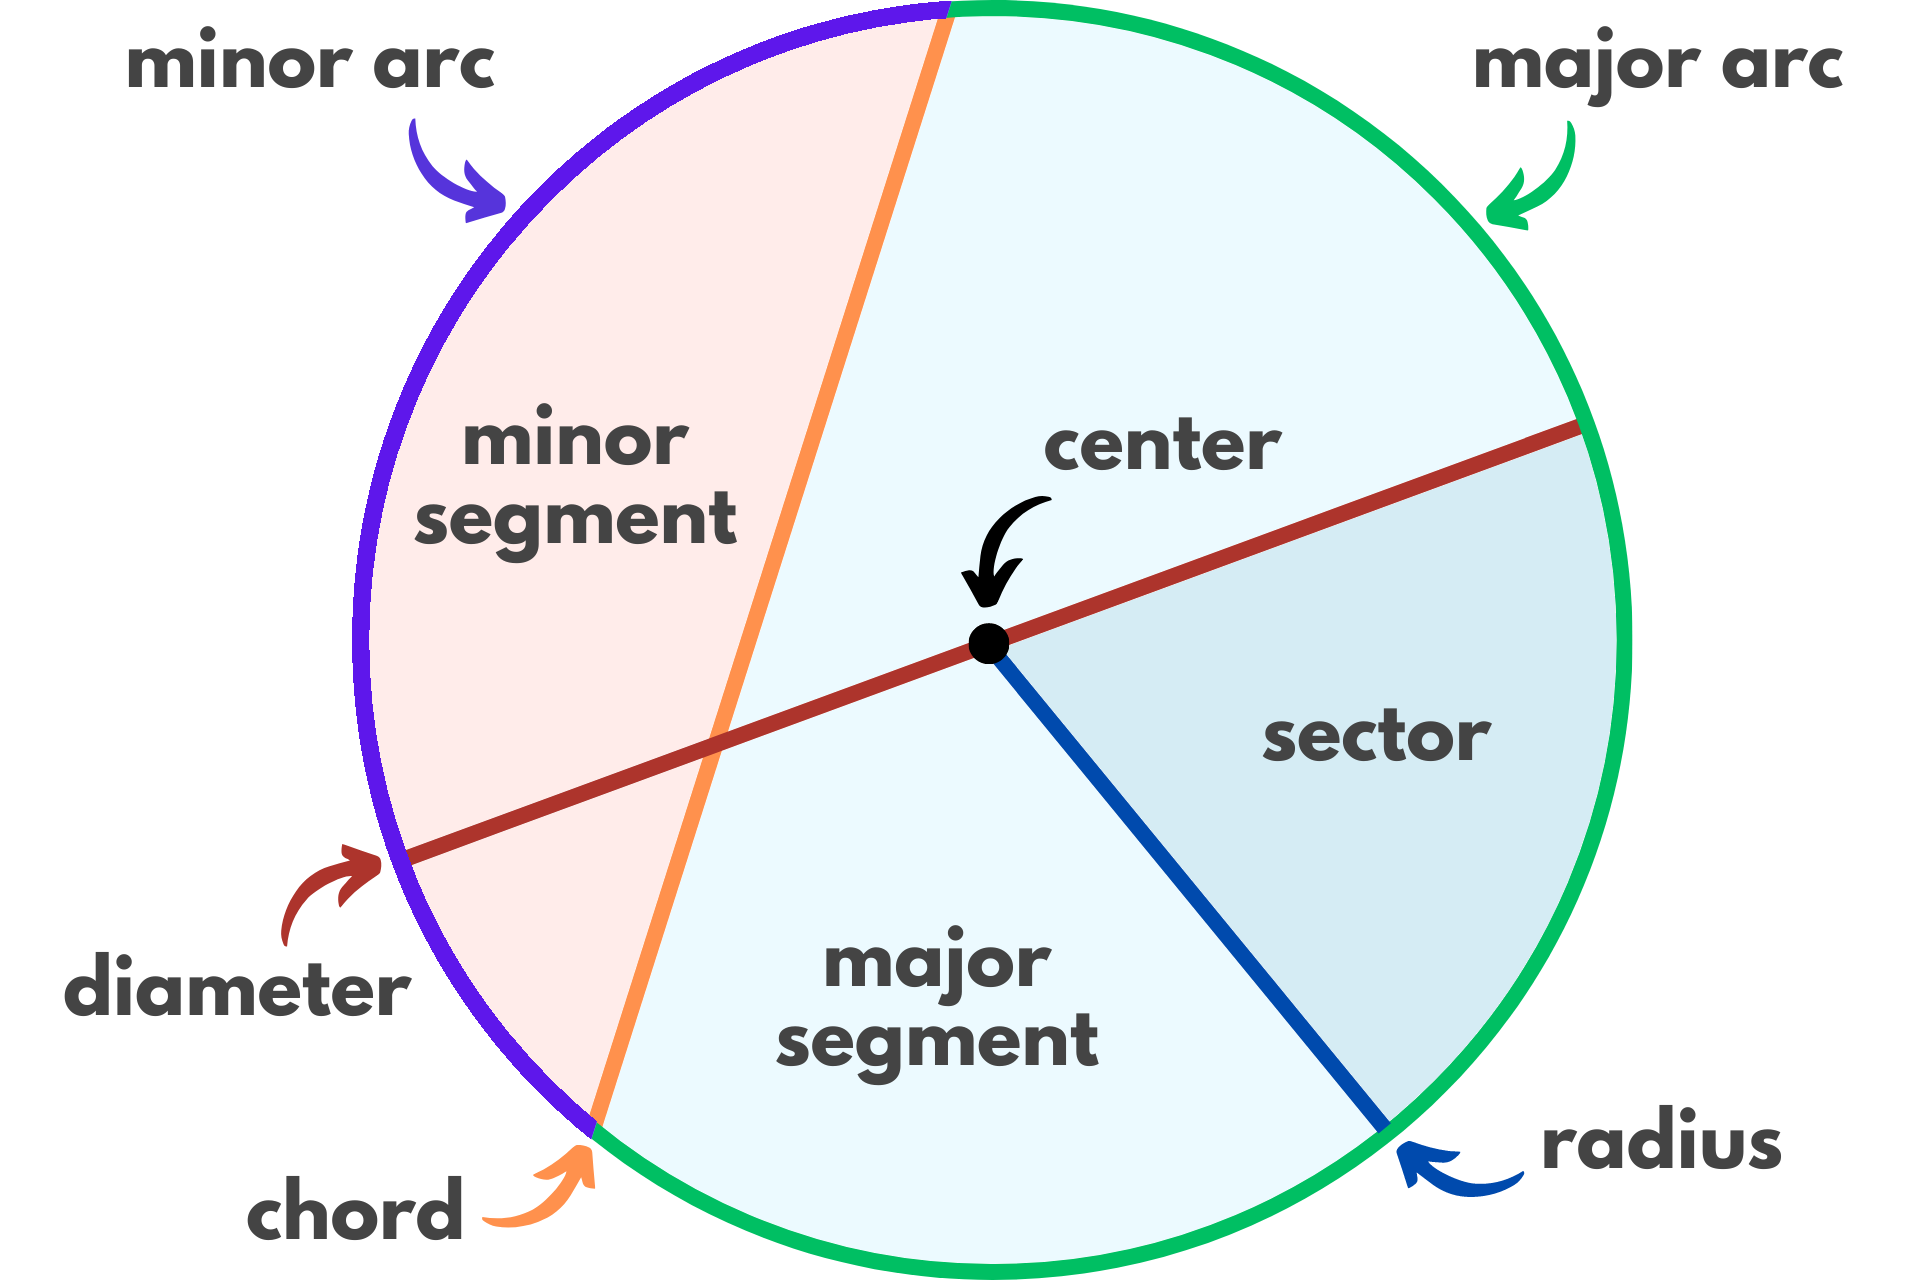 Graphic showing the properties of a circle, including the diameter, radius, center point, major arc, minor arc, major segment, minor segment, sector, and chord.